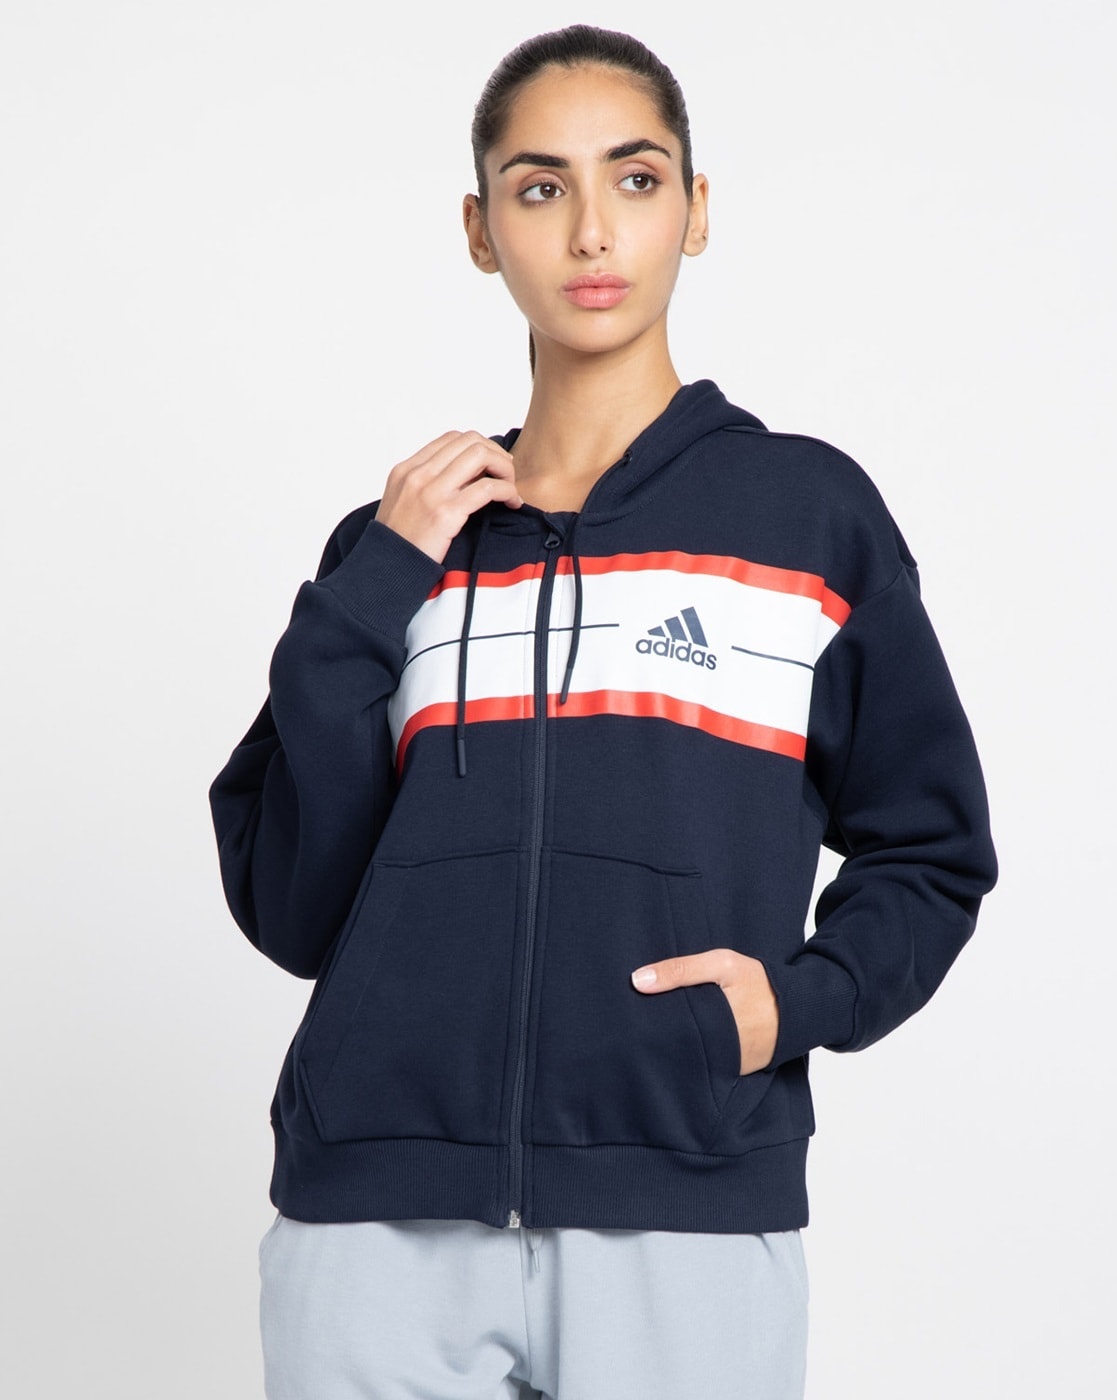 Buy Navy Blue Jackets & Women Online ADIDAS by for Coats